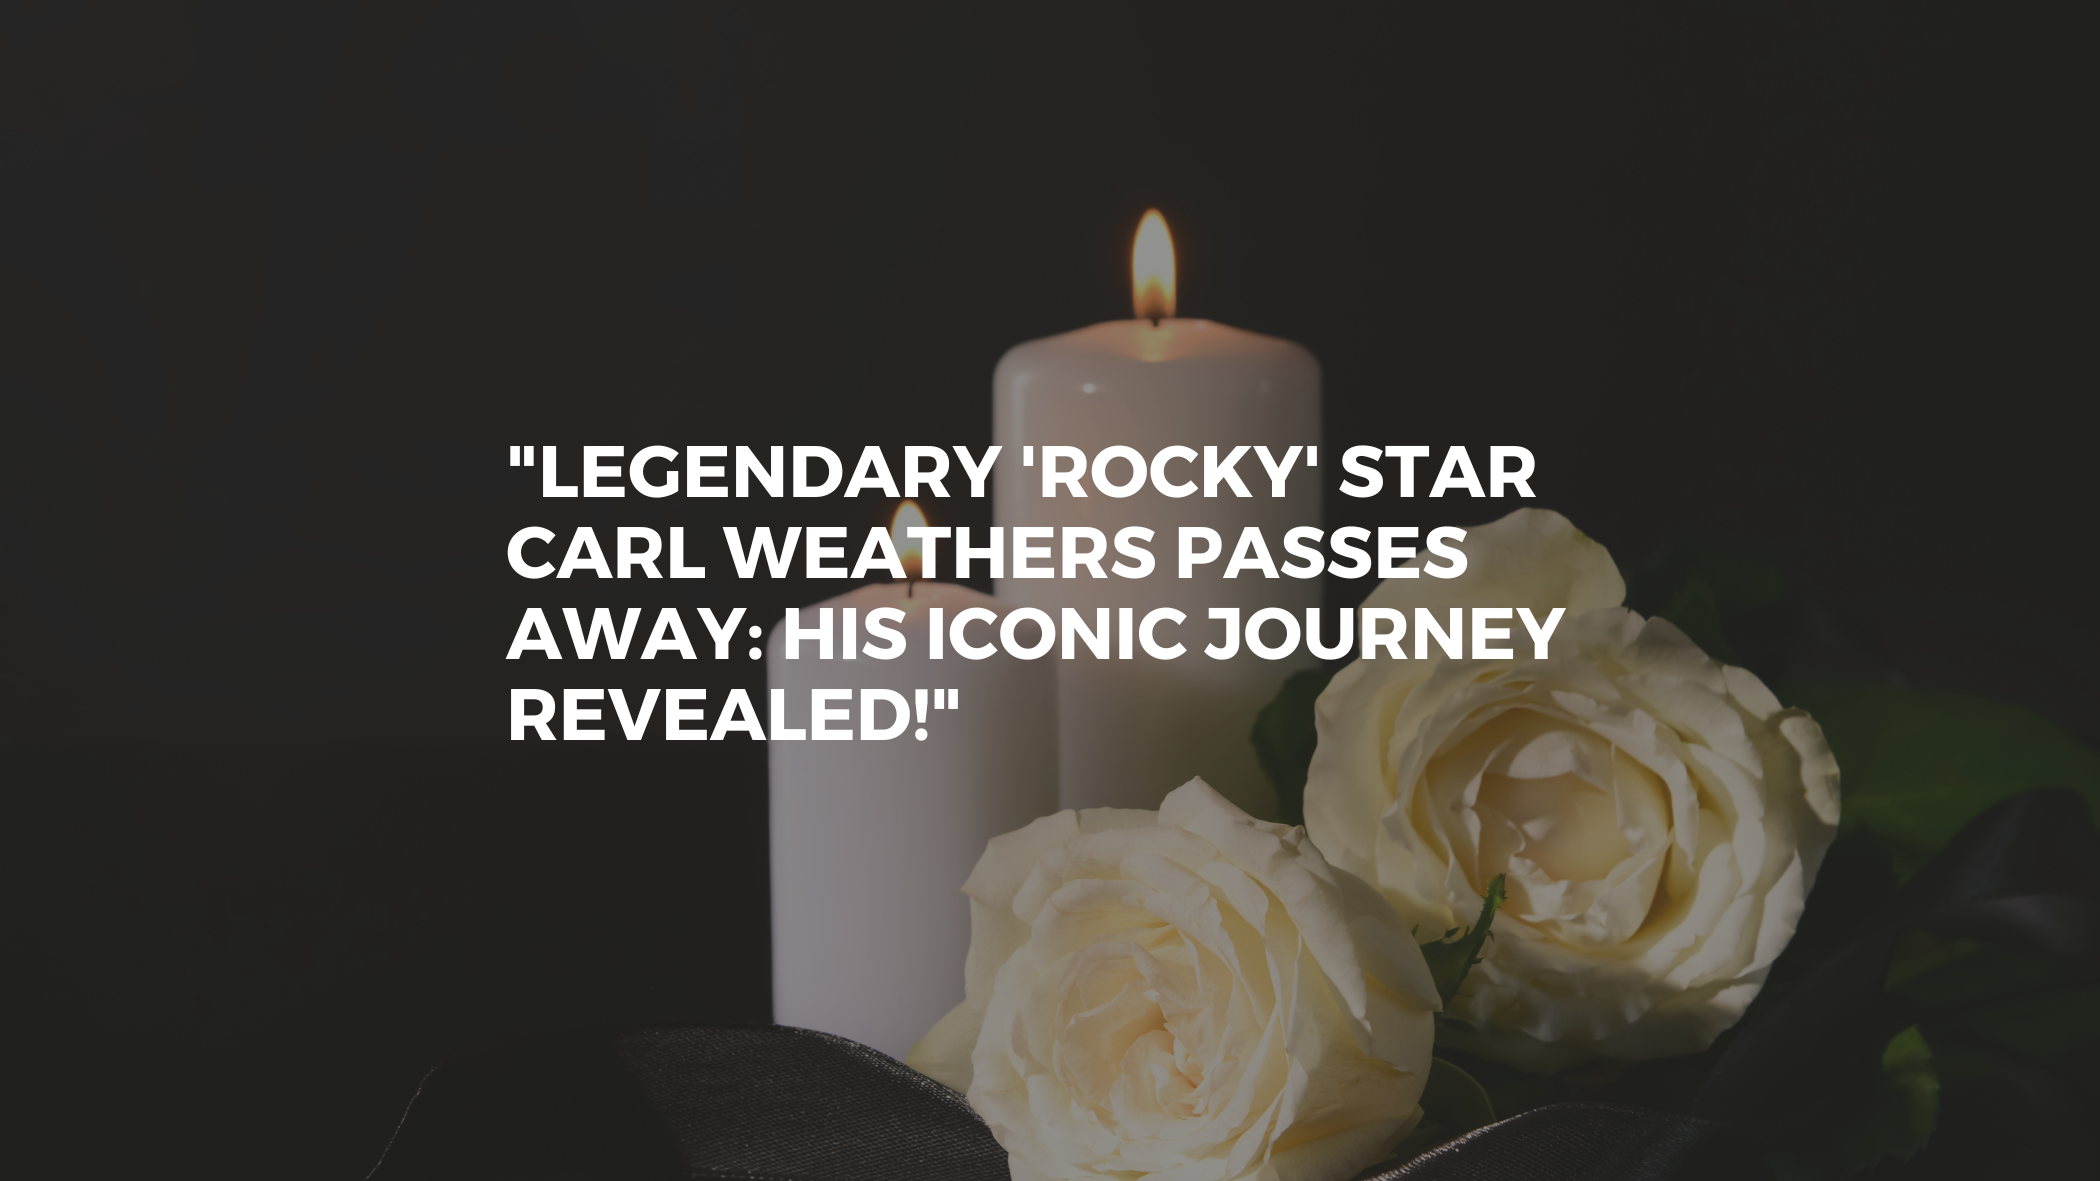 "Legendary 'Rocky' Star Carl Weathers Passes Away: His Iconic Journey Revealed!"